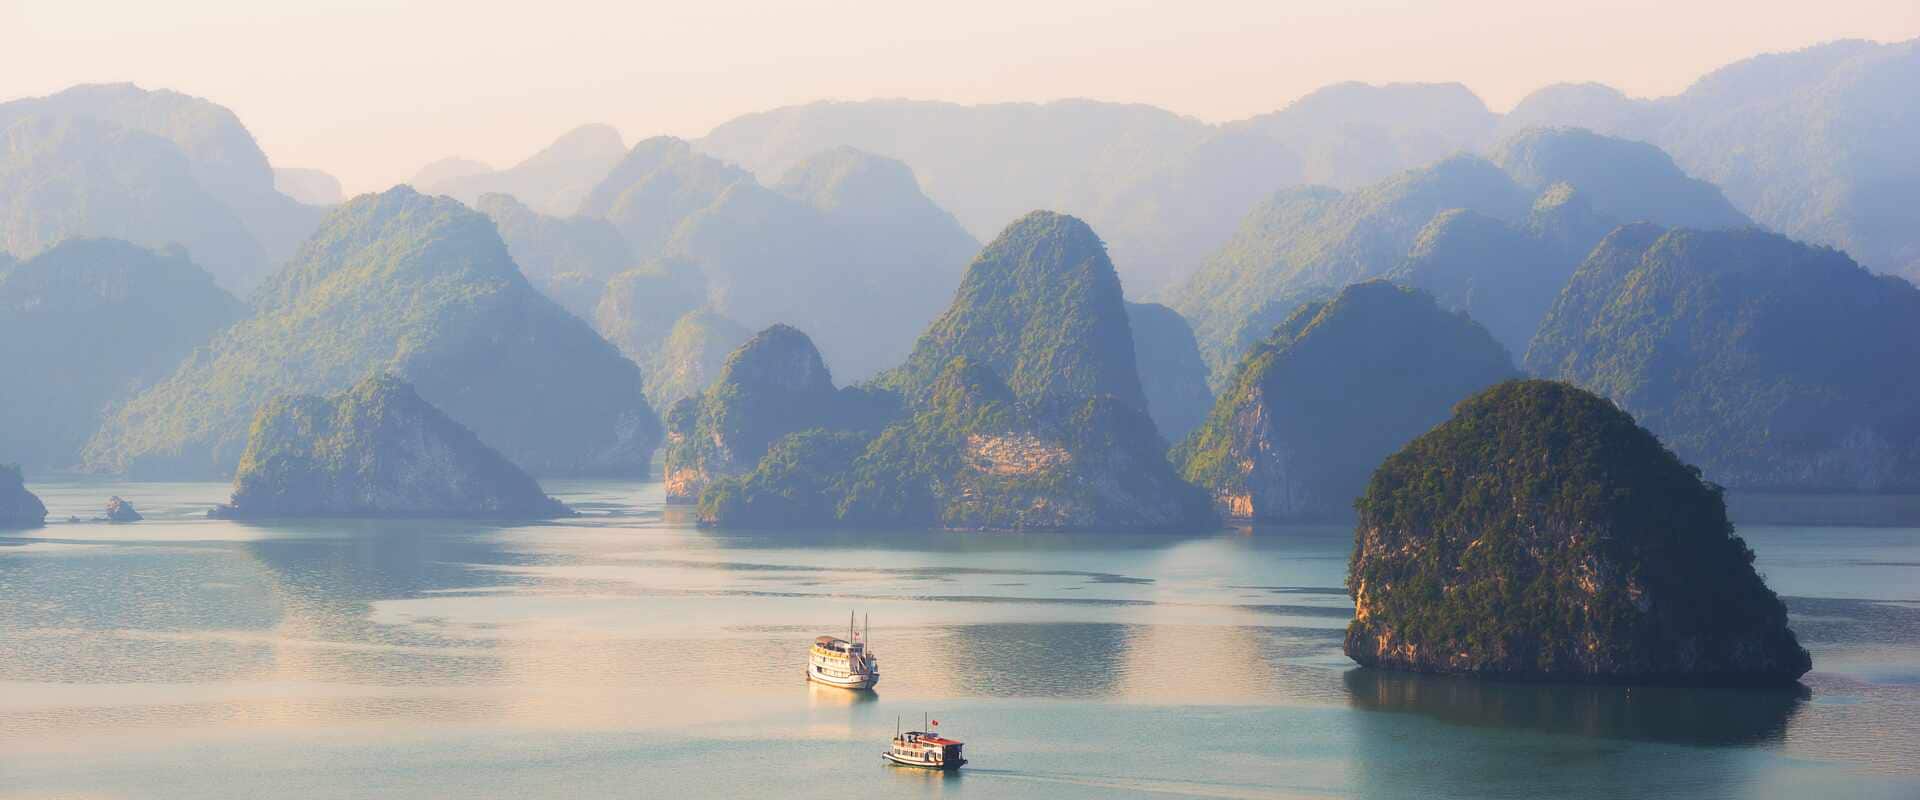 Two boats on calm water surrounded by towering limestone islands covered in dense rainforest